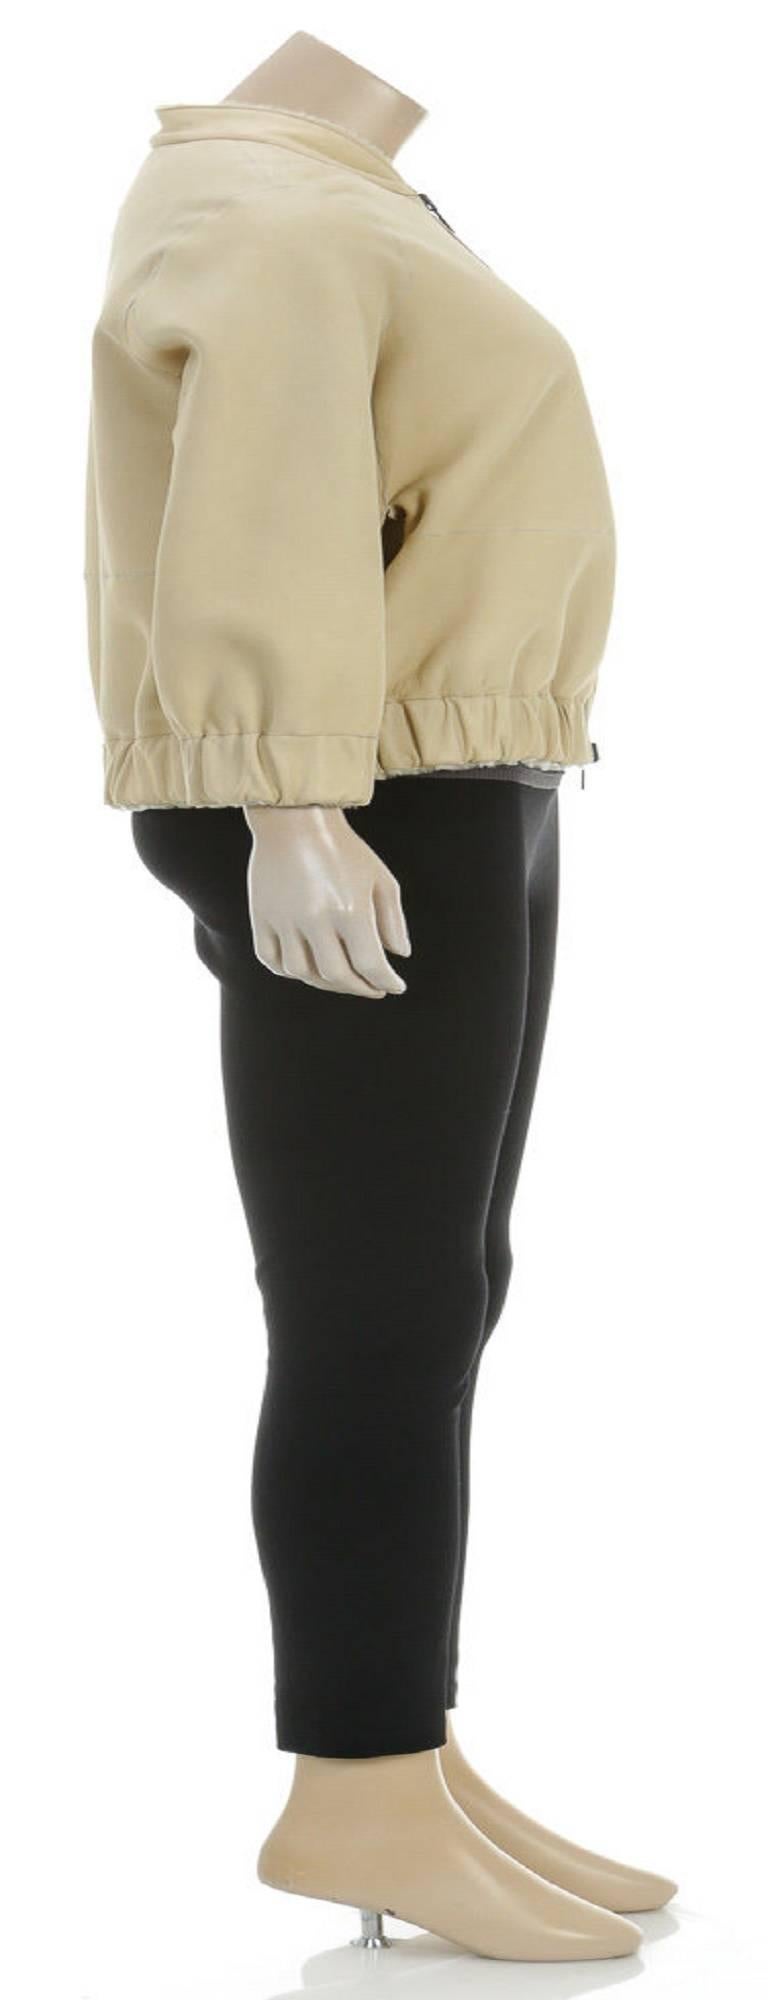 Designer: Brunello Cucinelli
Type: Jacket
Condition: Excellent condition
Color: Cream
Material: n/a
Dimensions: Bust: 40